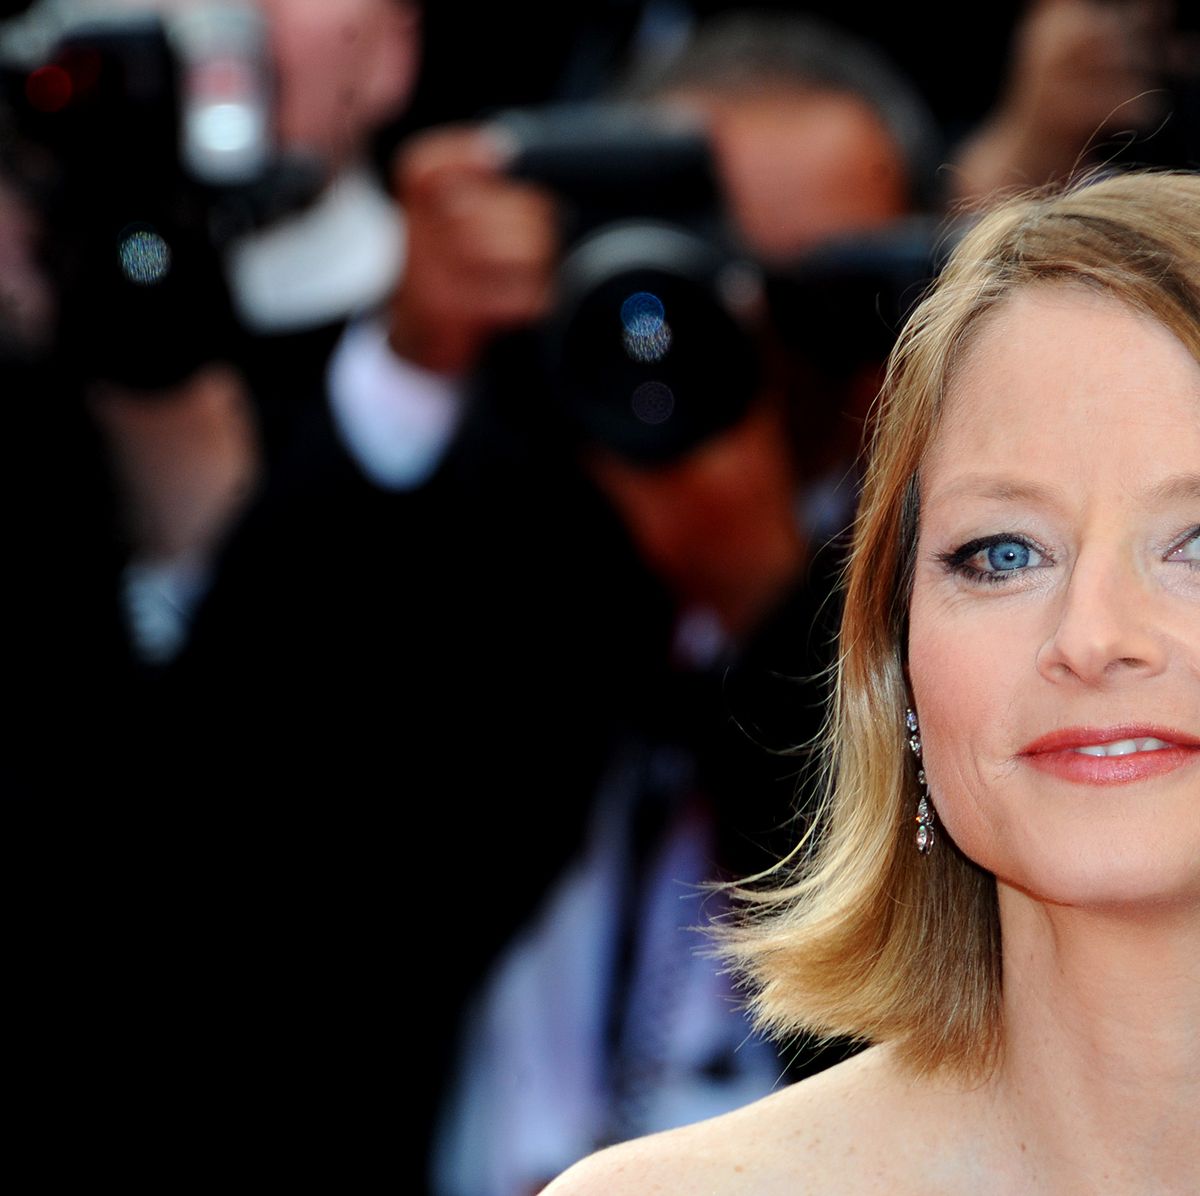 There are different ways of being a woman': Jodie Foster on beauty